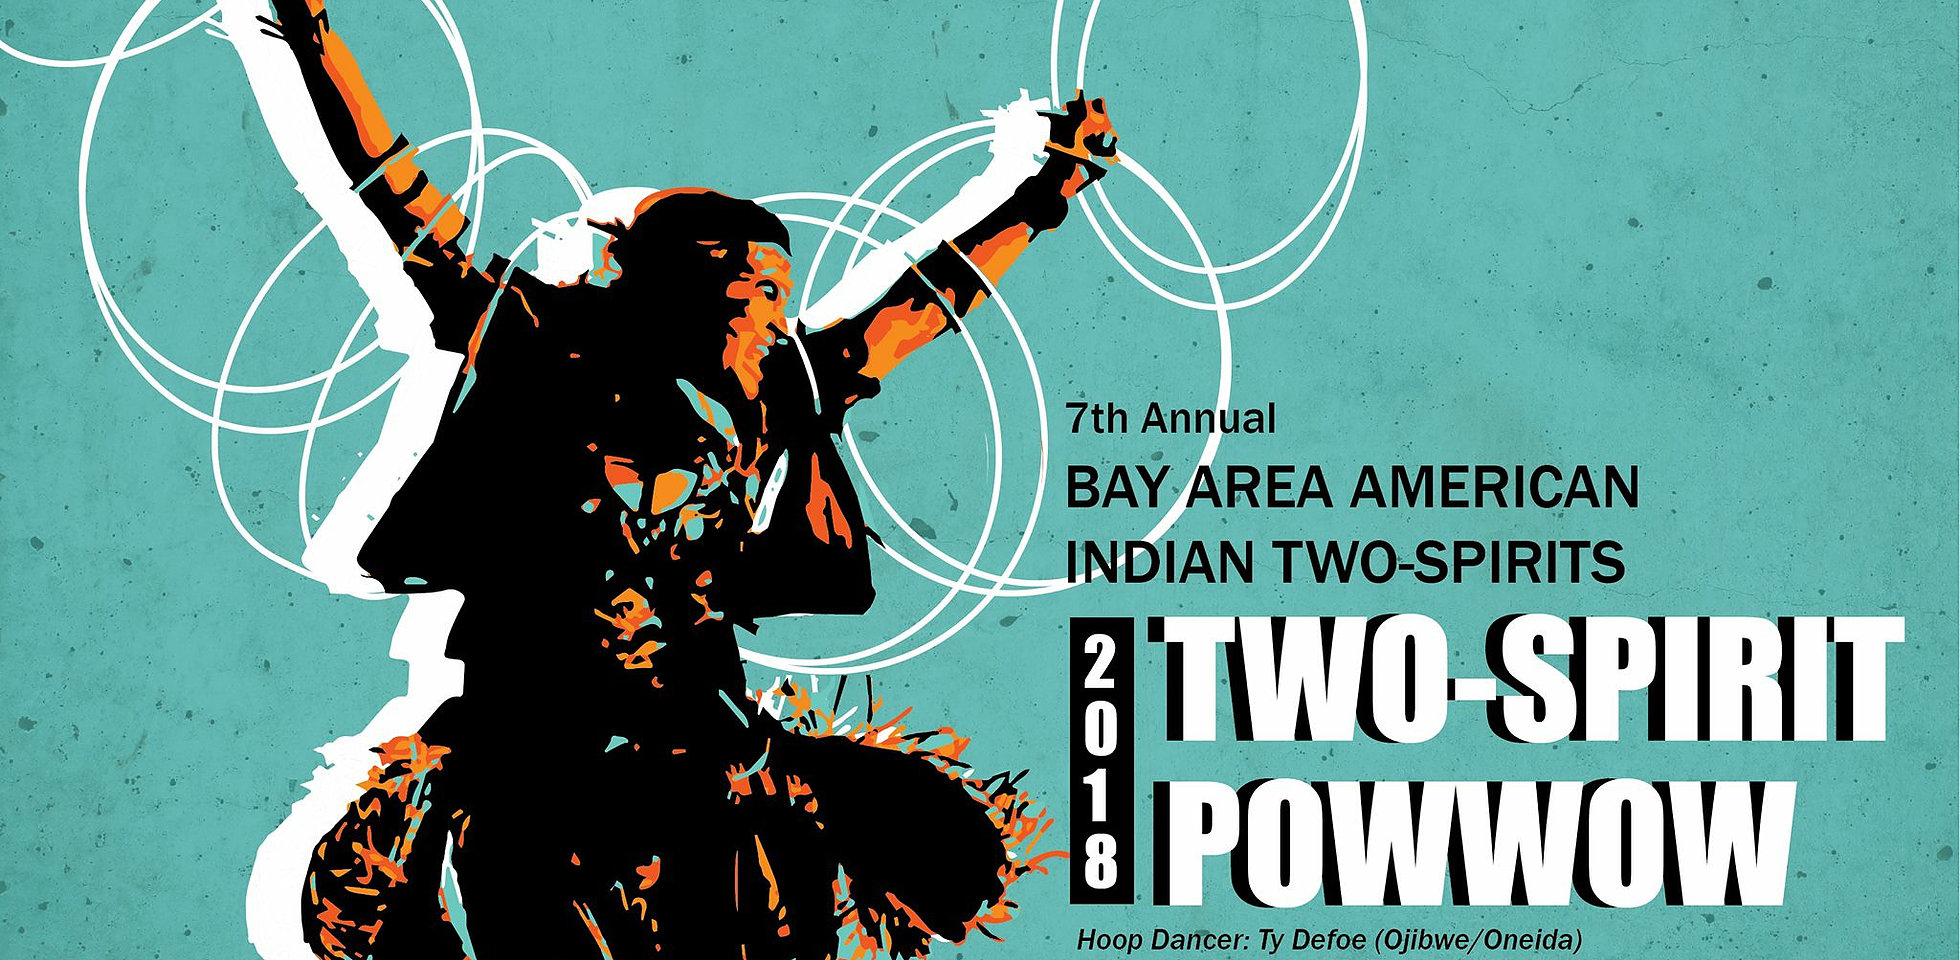 Bay Area American Indian Two-Spirits prepare for seventh annual powwow